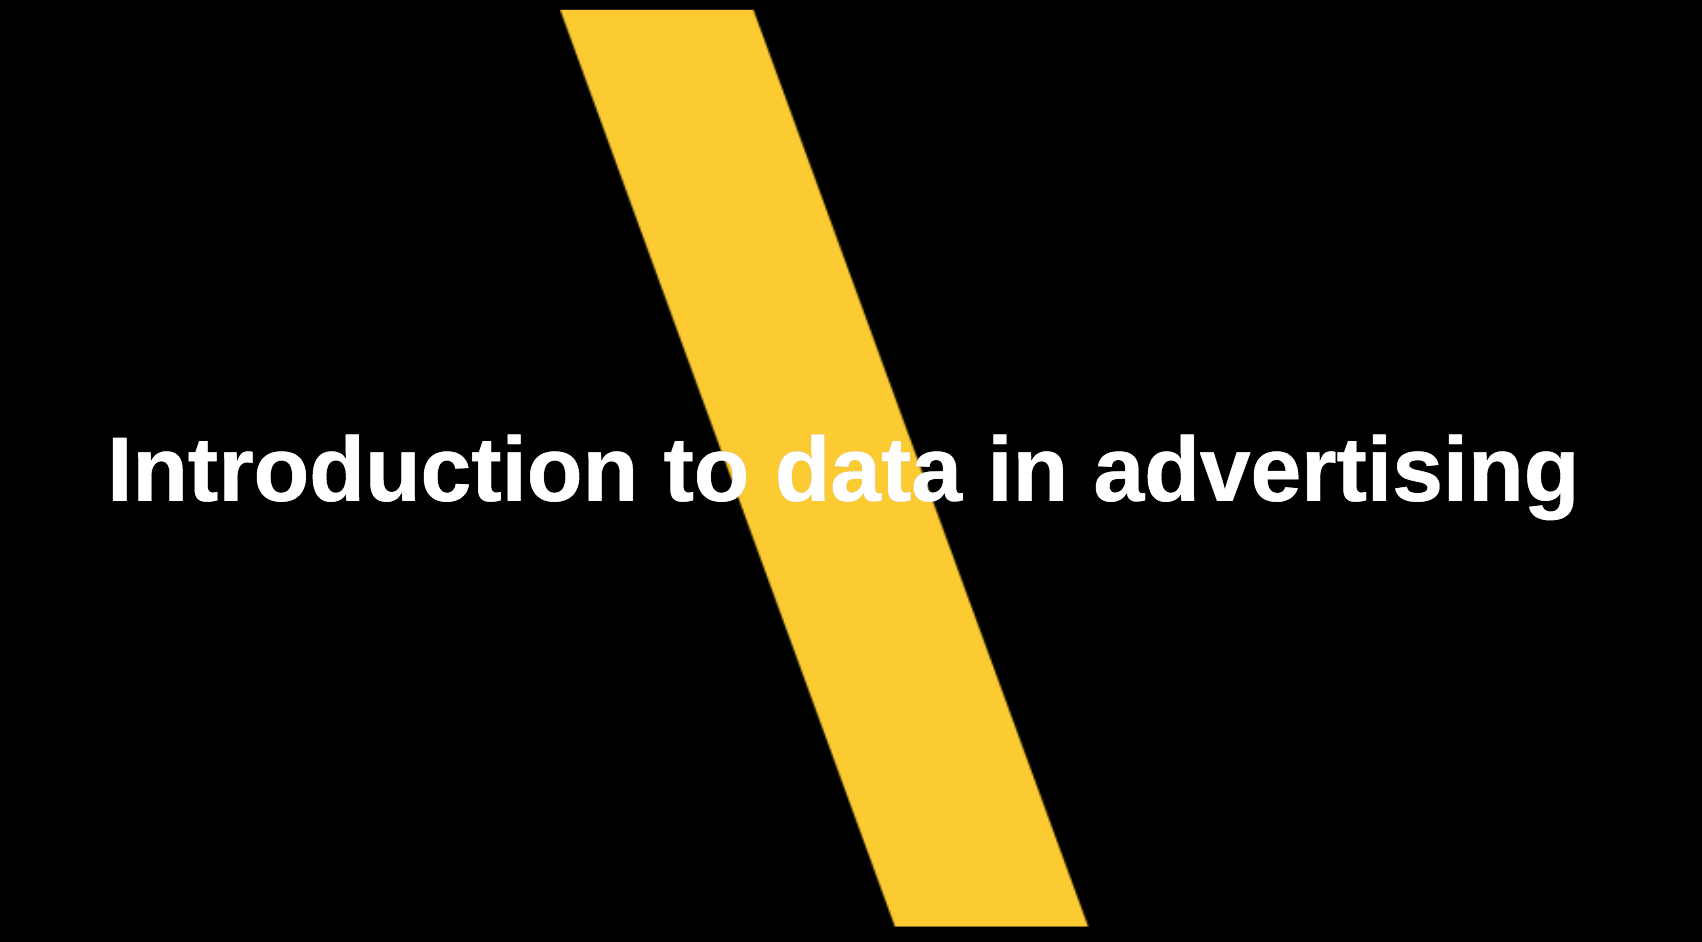 Introduction to data in advertising